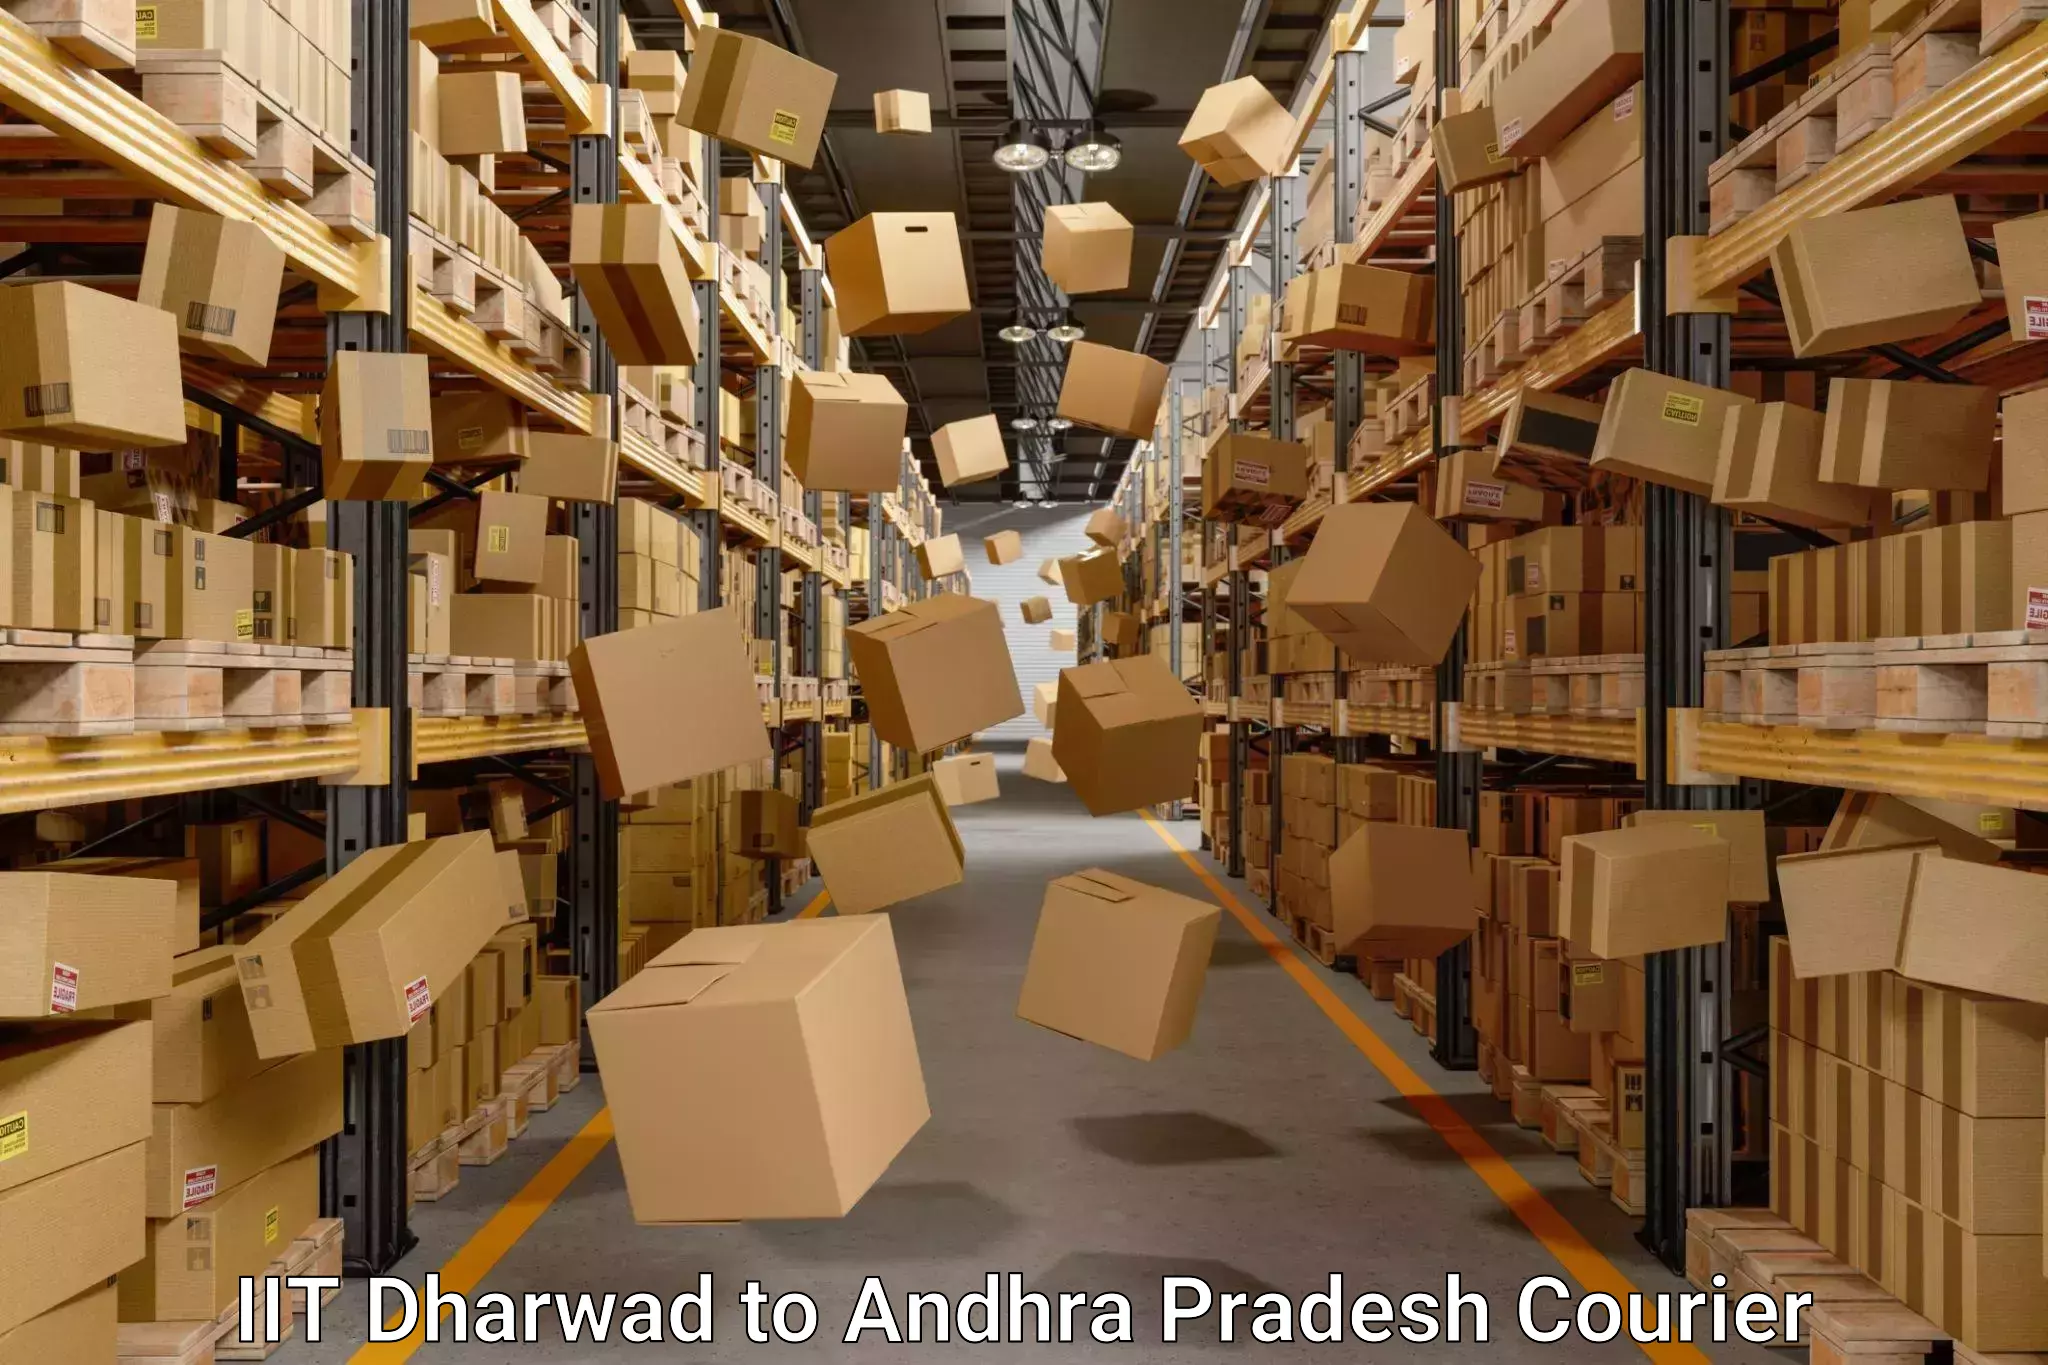 Trusted moving company IIT Dharwad to Andhra Pradesh